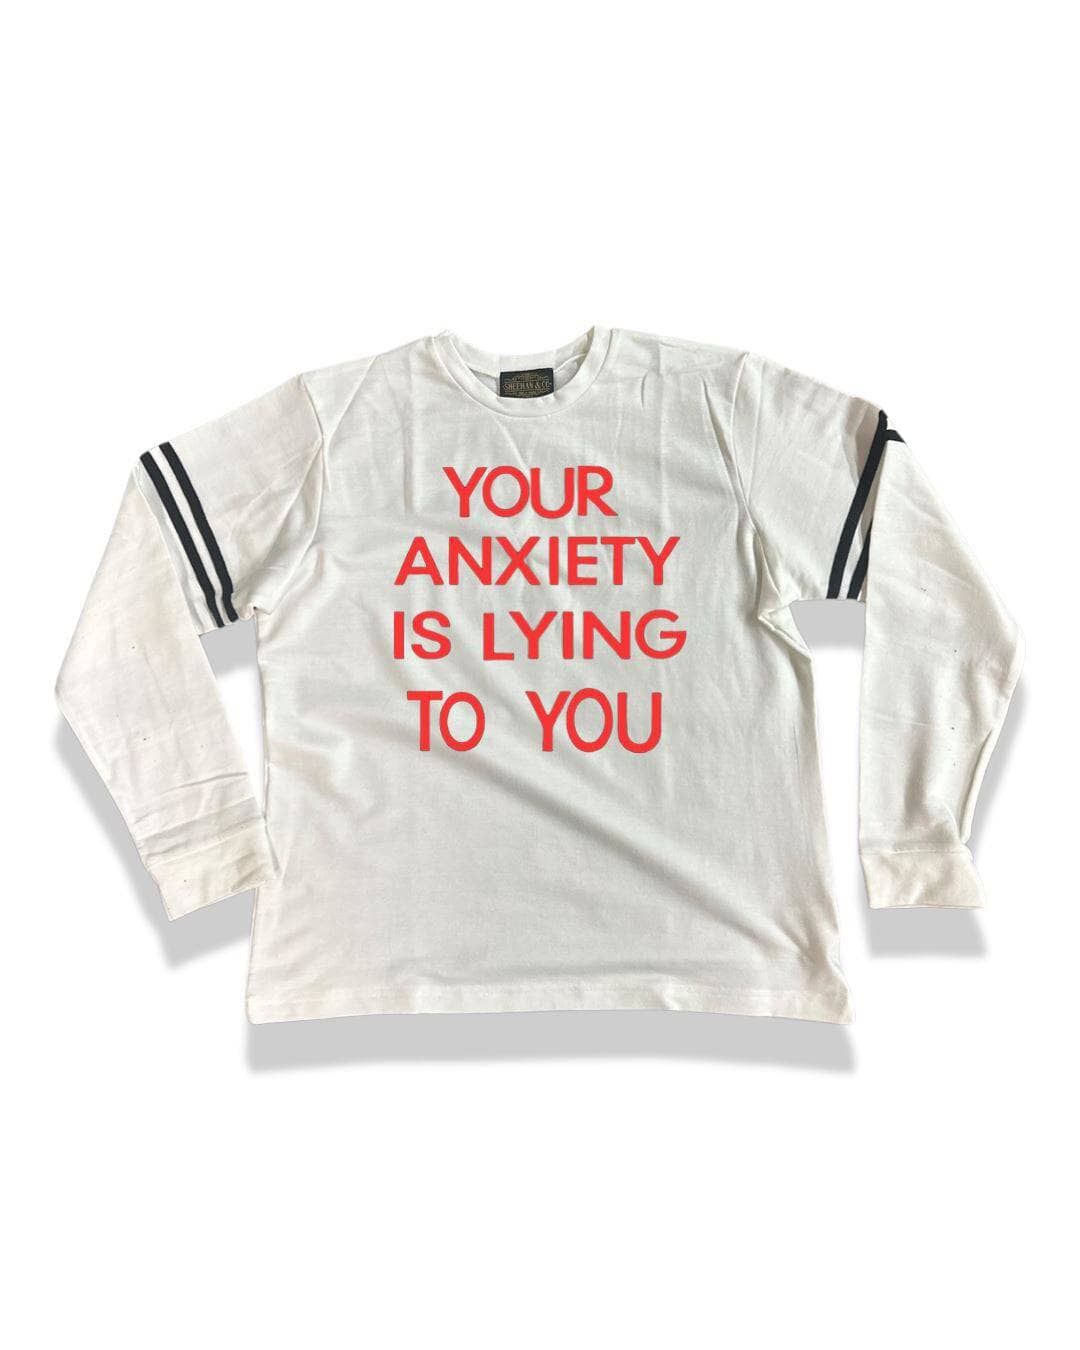 Your Anxiety is Lying to You Statement on French Terry Sweatshirt - Sheehan and Co.